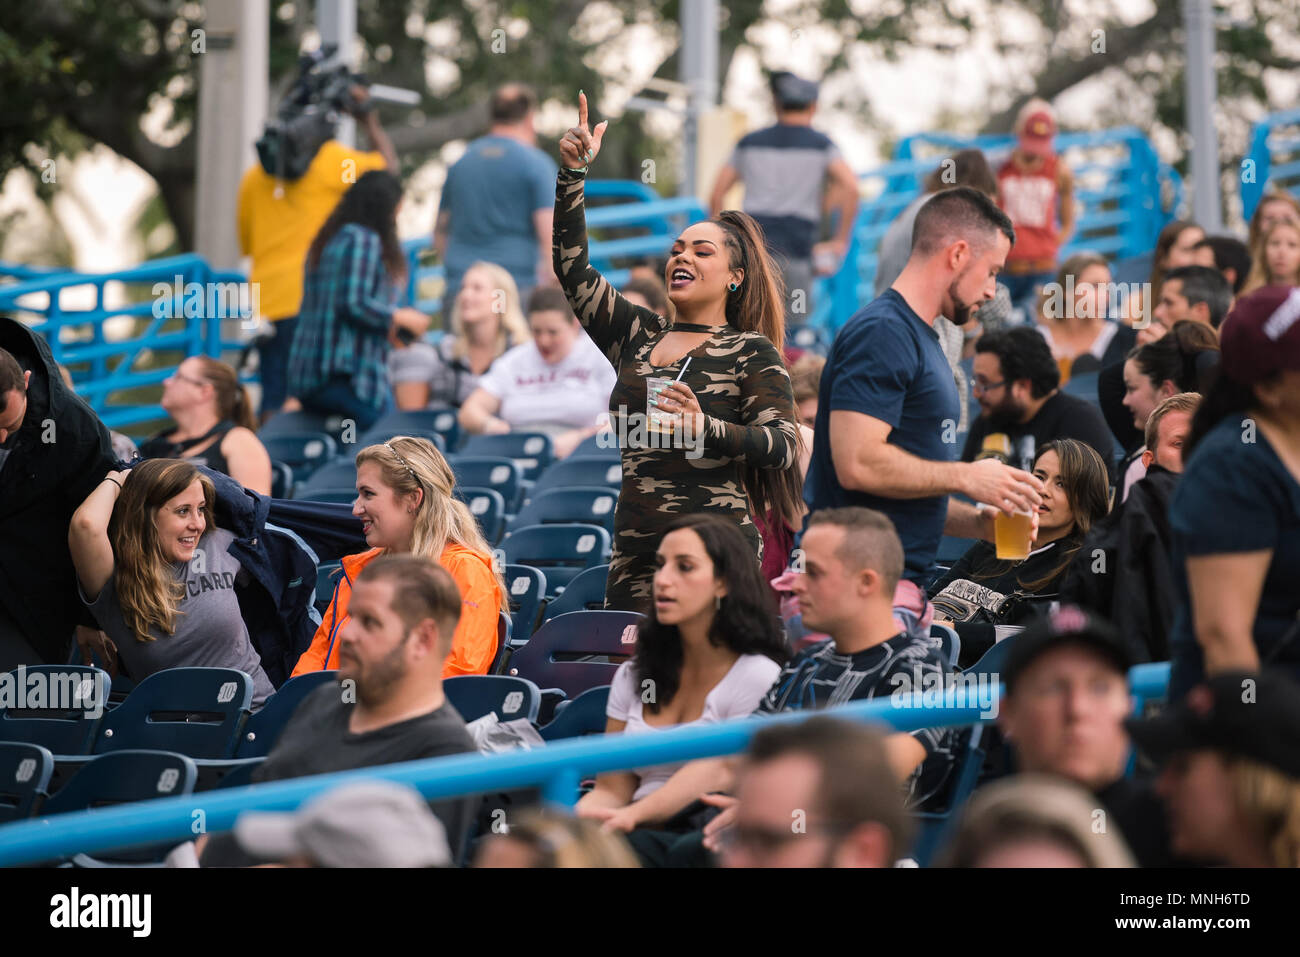 Pompano Beach, Florida, USA. 16th May, 2018. A woman seen enjoying the live performance during the Parkland Strong Benefit Concert.South Florida holds benefit concert to raise money for Marjory Stoneman Douglas victim families, and survivors. 3,000 people attended the soldout show, in support of their community. Credit: Emilee Mcgovern/SOPA Images/ZUMA Wire/Alamy Live News Stock Photo